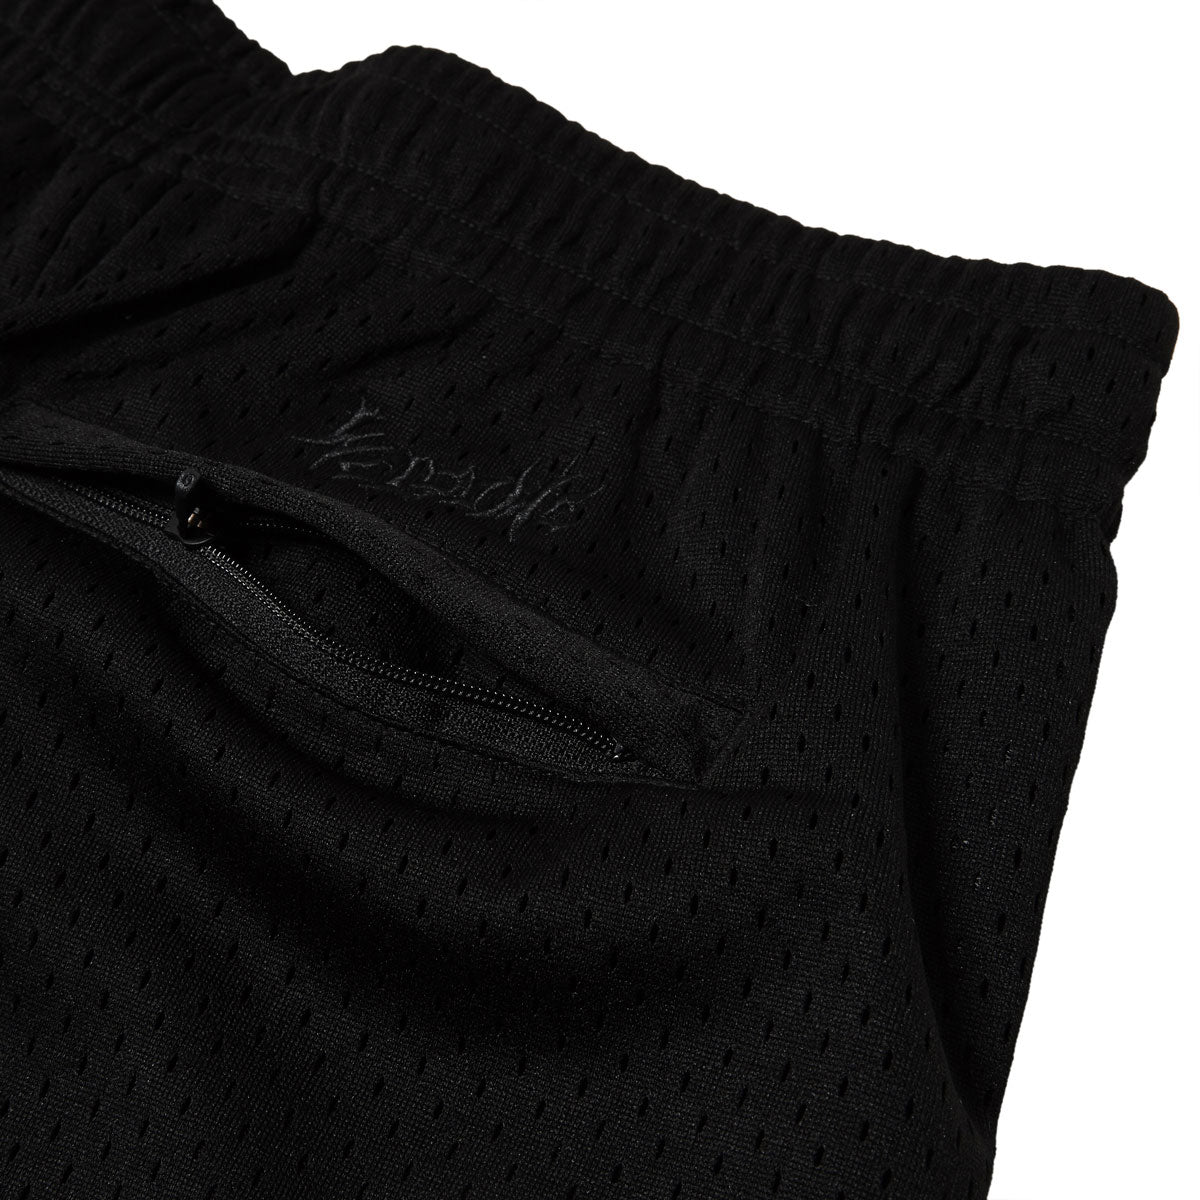 Welcome Barb Mesh Shorts - Black image 3